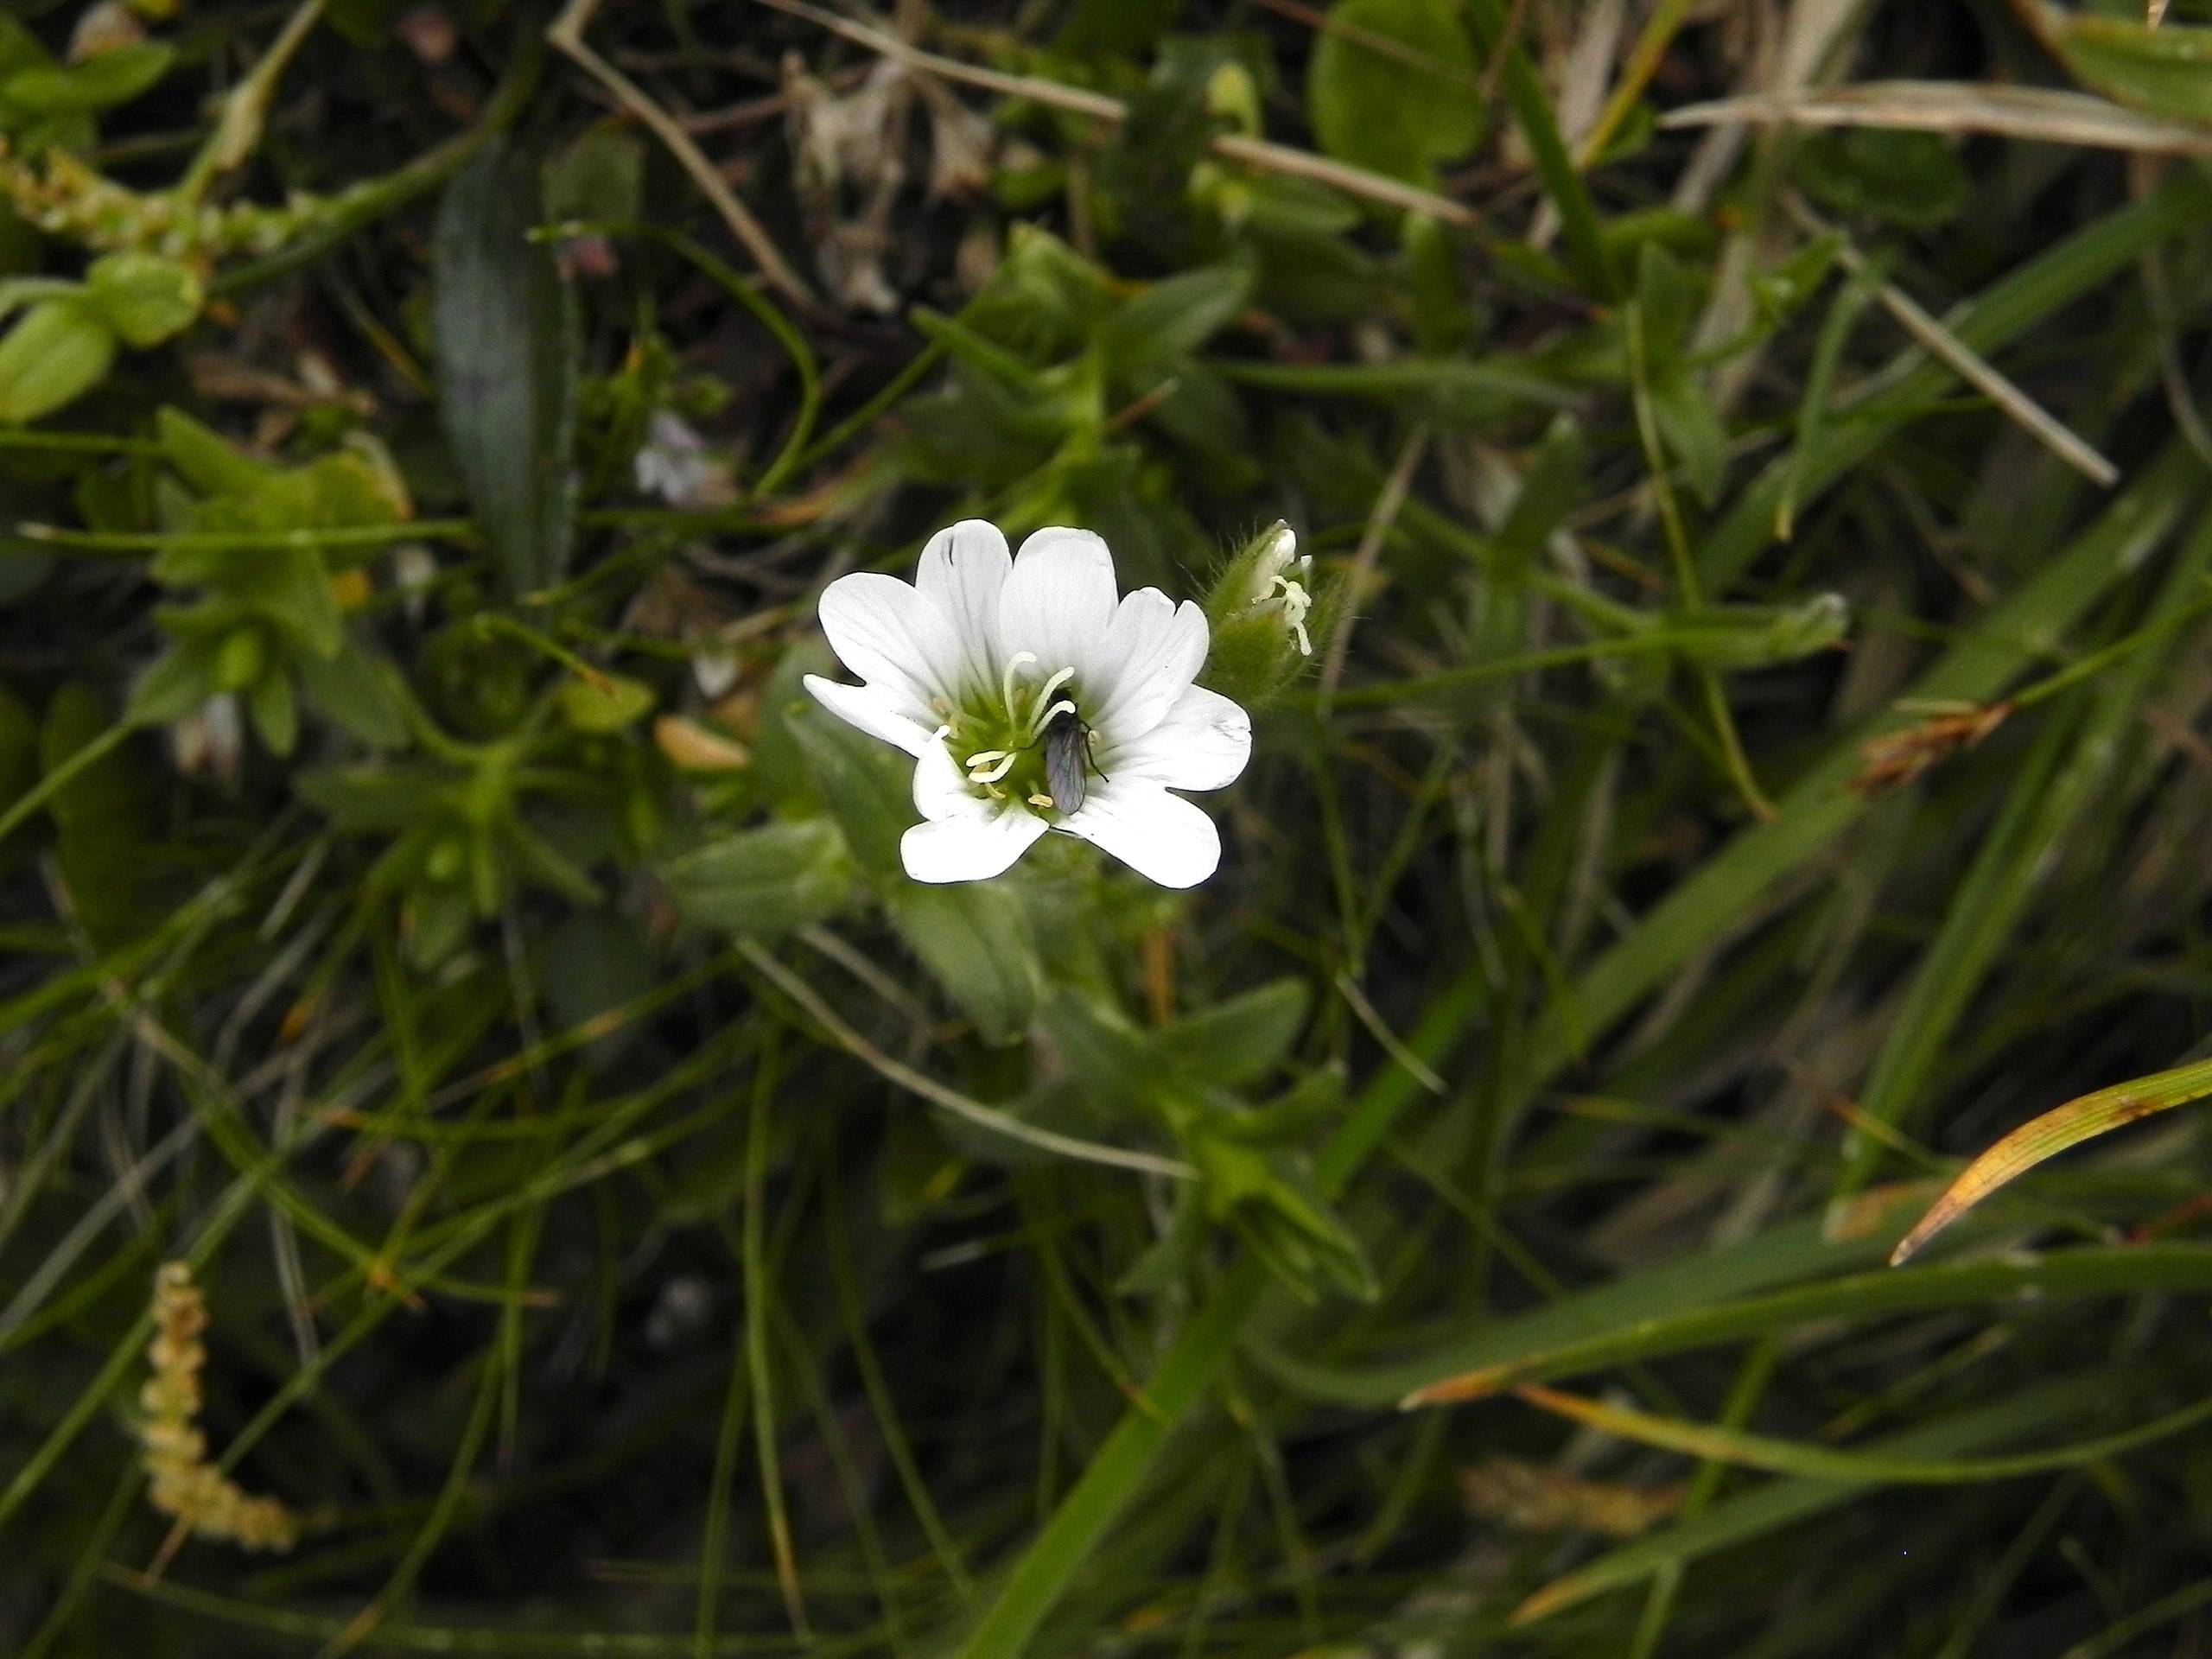 a white flower with white filaments, yellow anthers, green leaves and stems